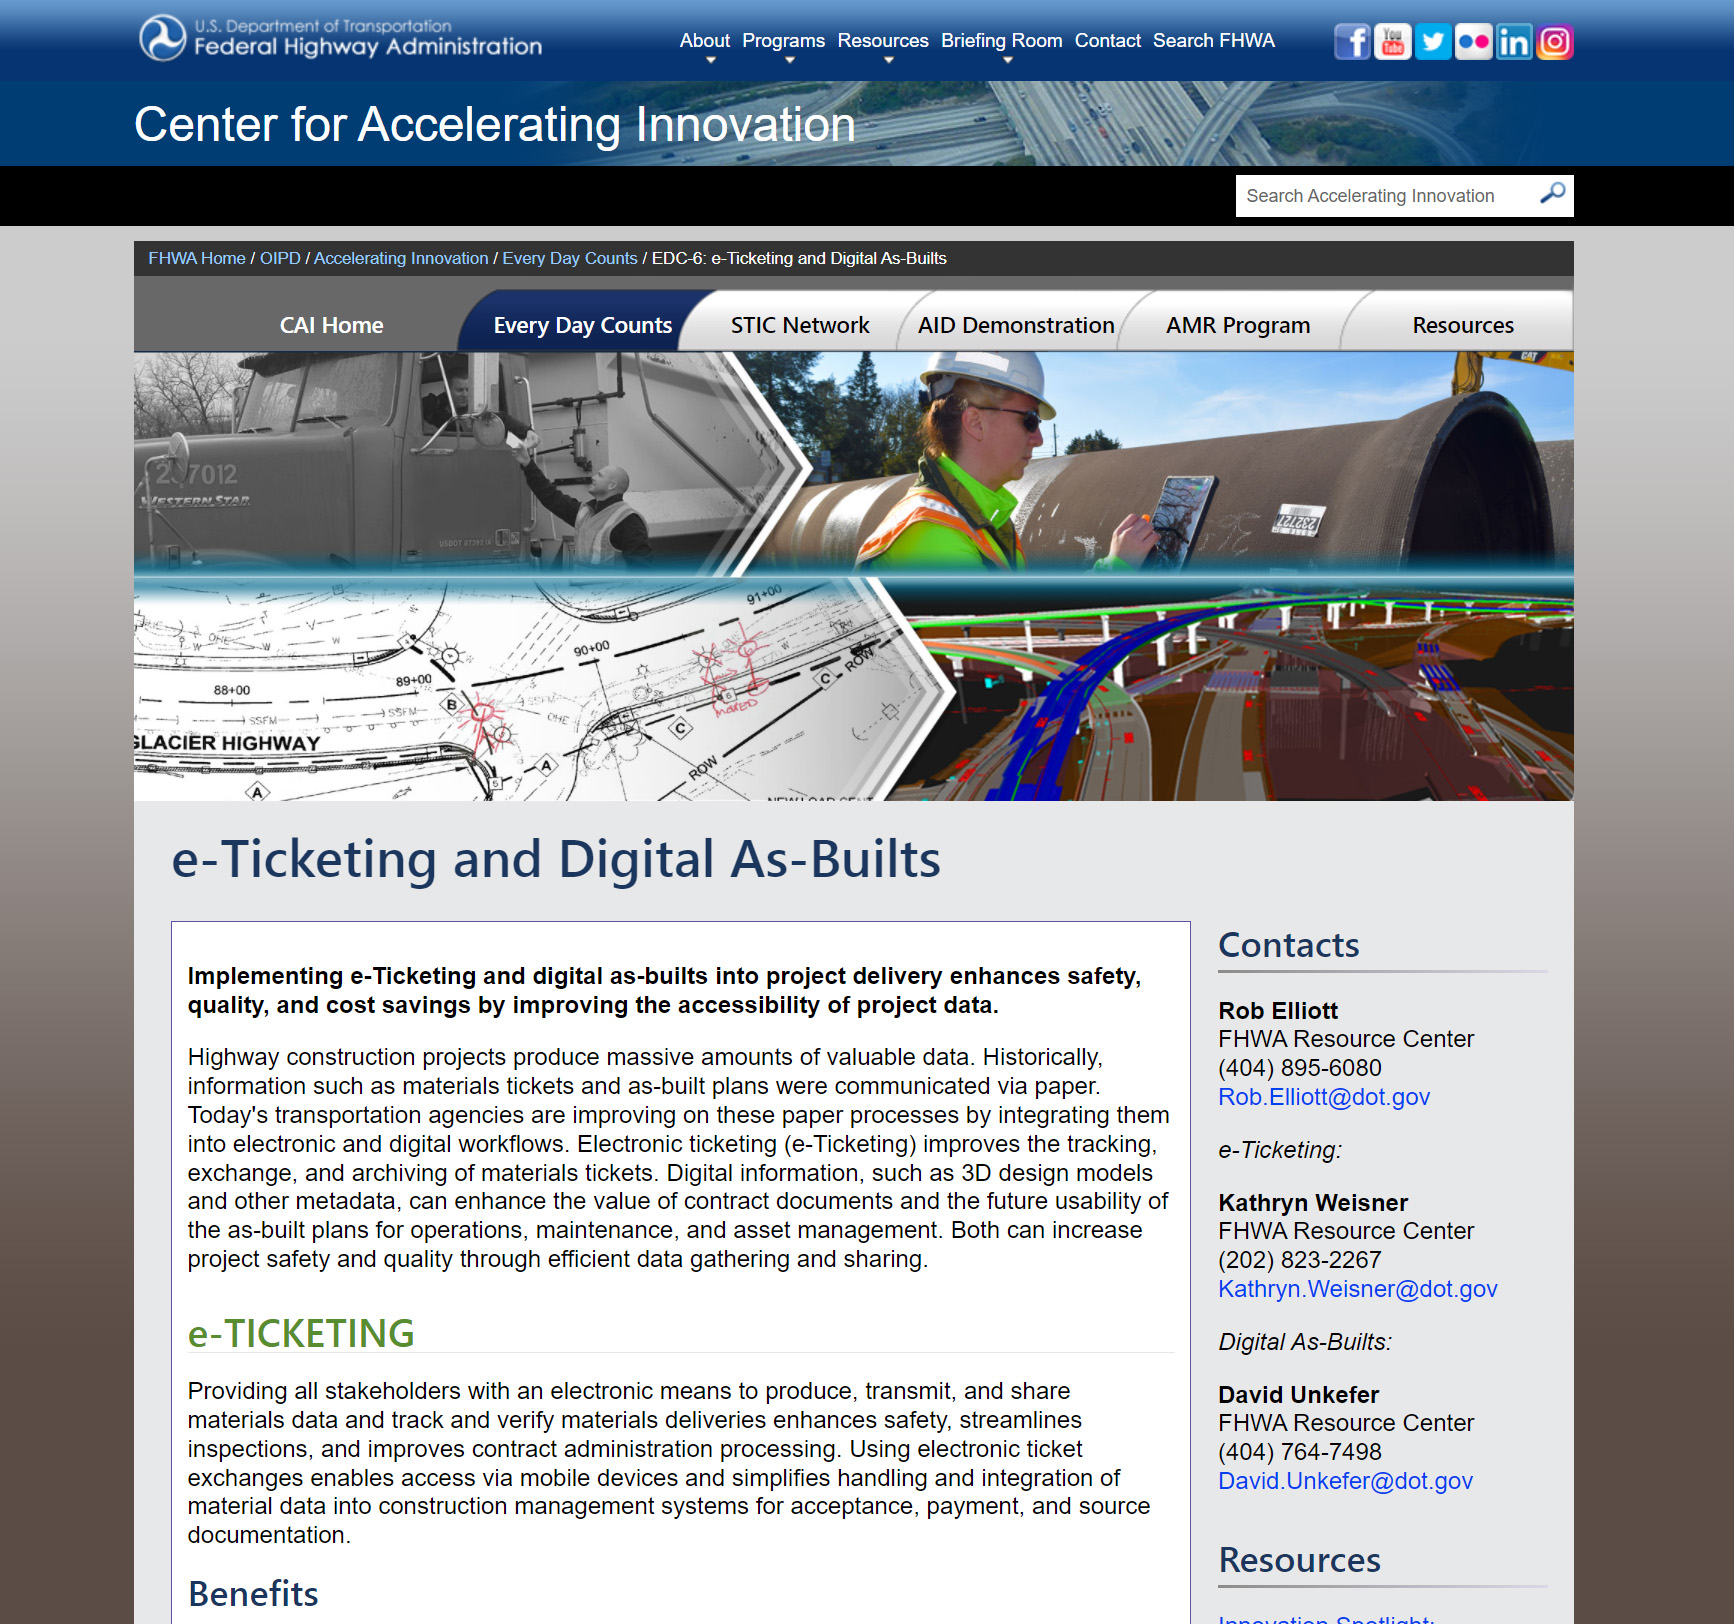 Screenshot of the FHWA e-Ticketing and digital as-built web page.